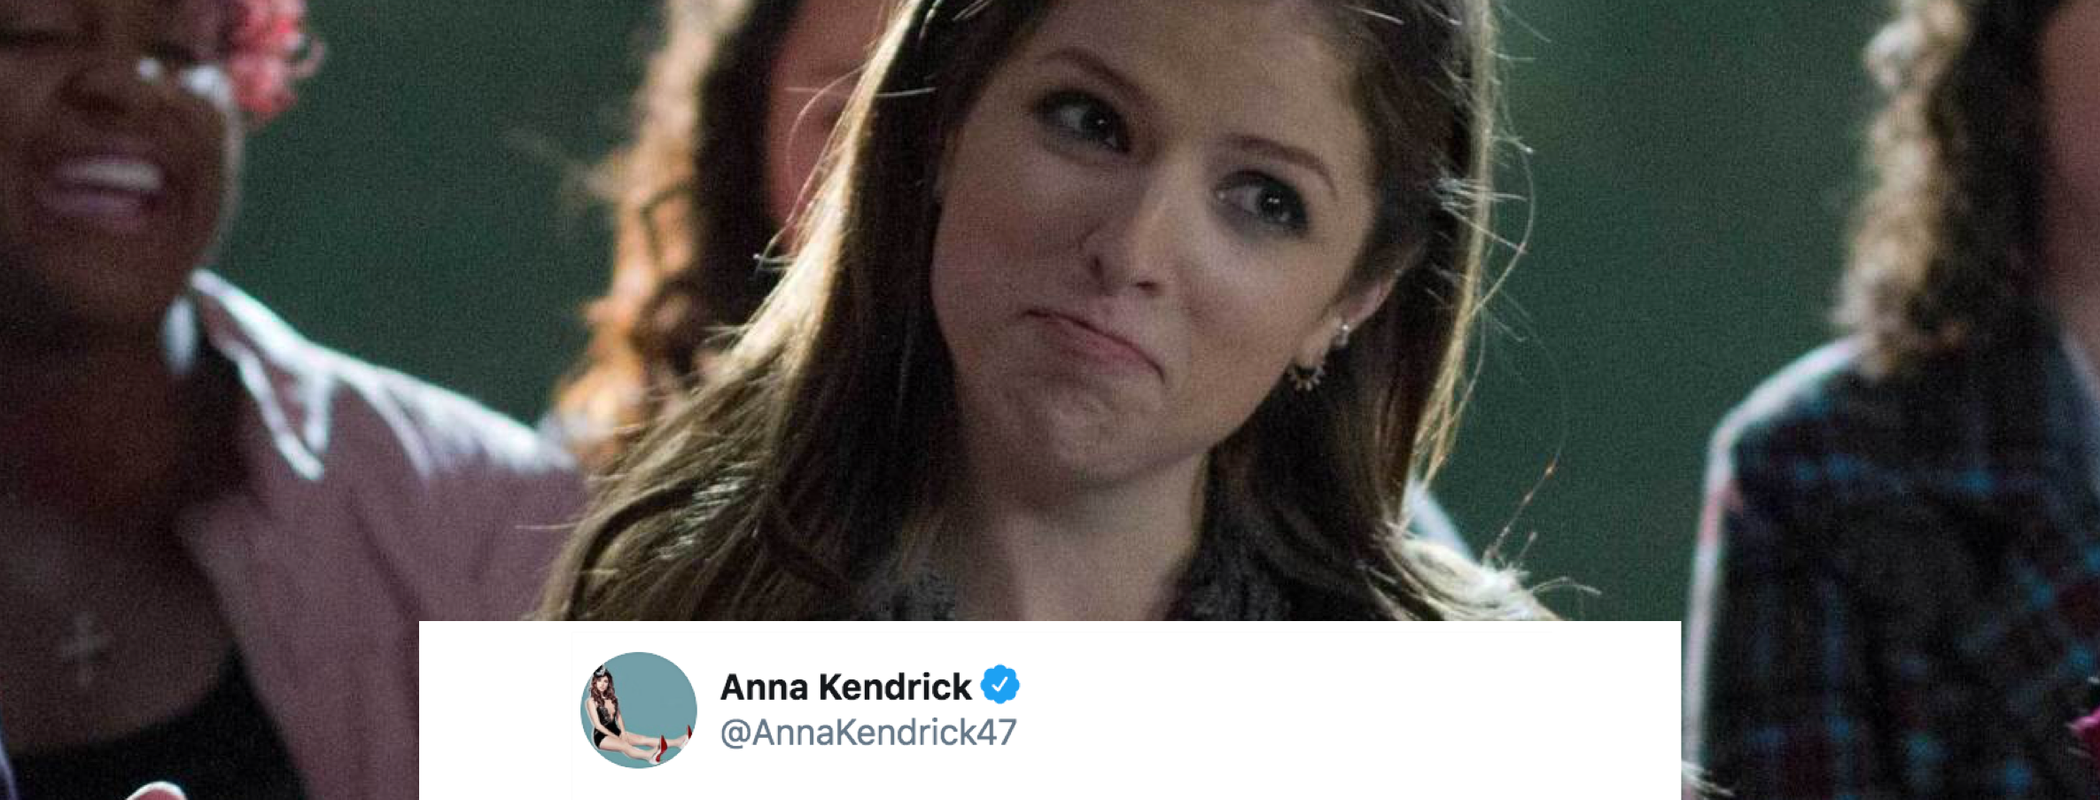 Anna Kendrick Porn Real - How Anna Kendrick Makes You Feel Like Her Best Friend Using Twitter